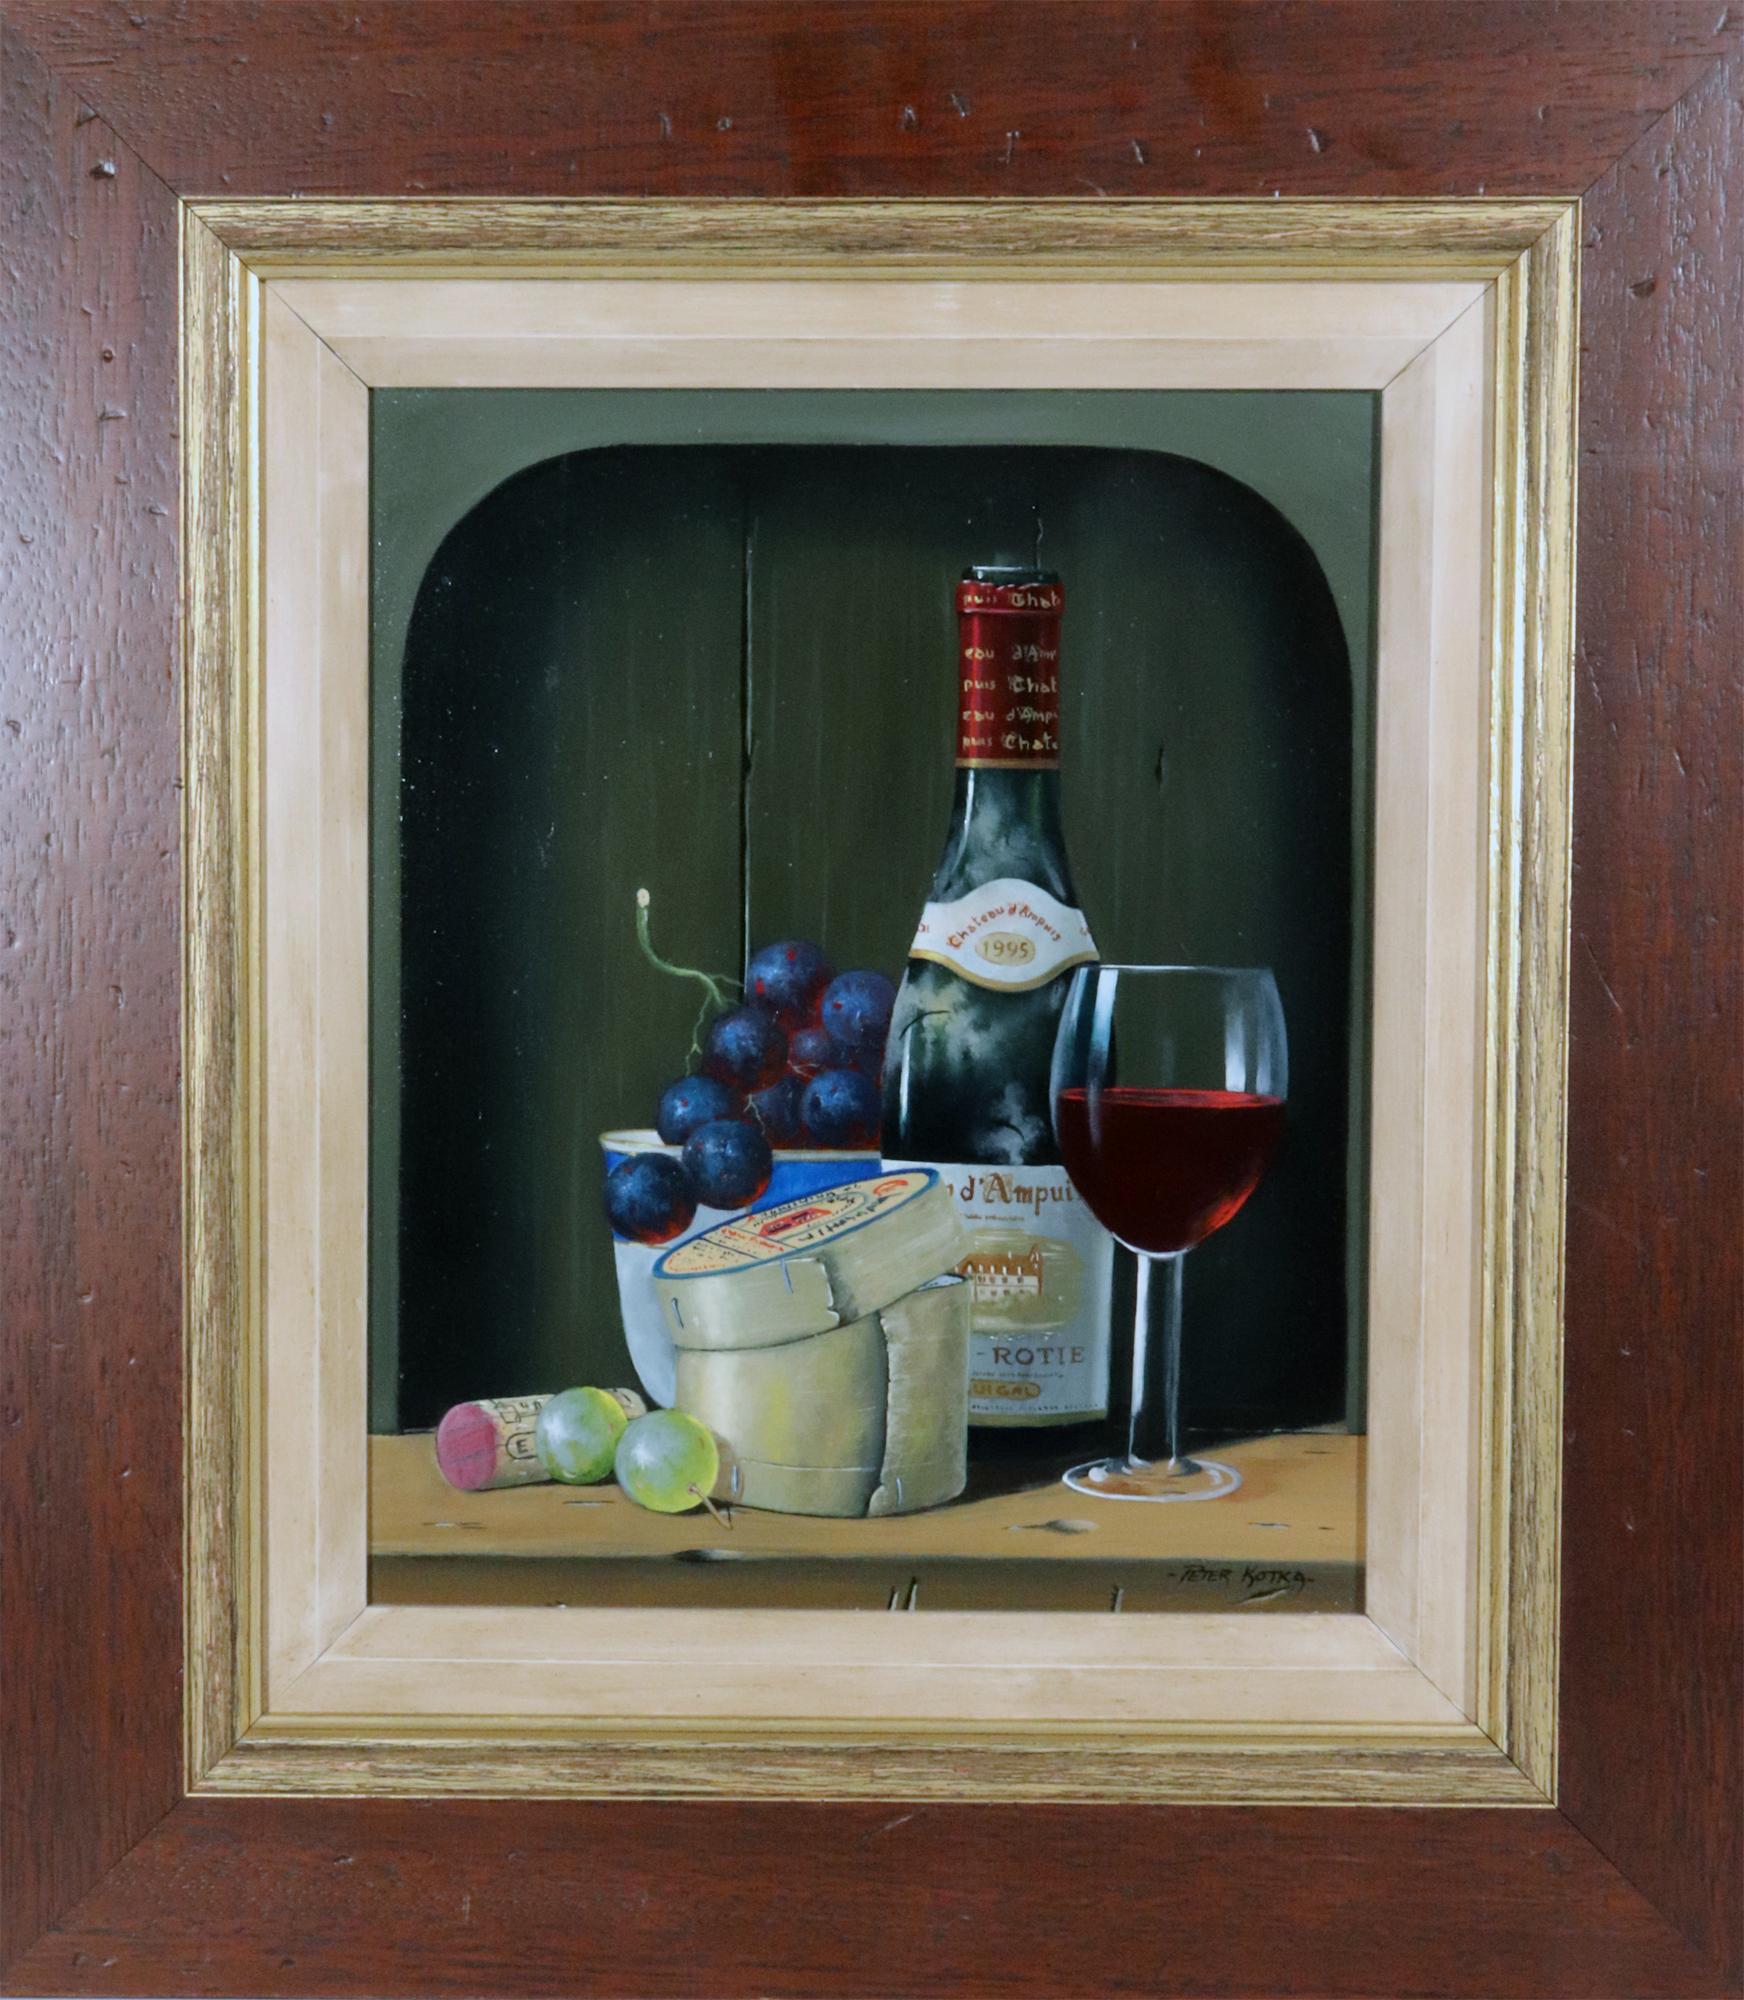 Peter A. Kotka Stiil Life with Wine & Cheese,
Oil on Linen Panel,
Signed lower right.
1995.

The trompe l'oeil still life of a bottle of wine, a half-empty wine glass and a small bunch of grapes in a small bowl with a round of French Cheese and